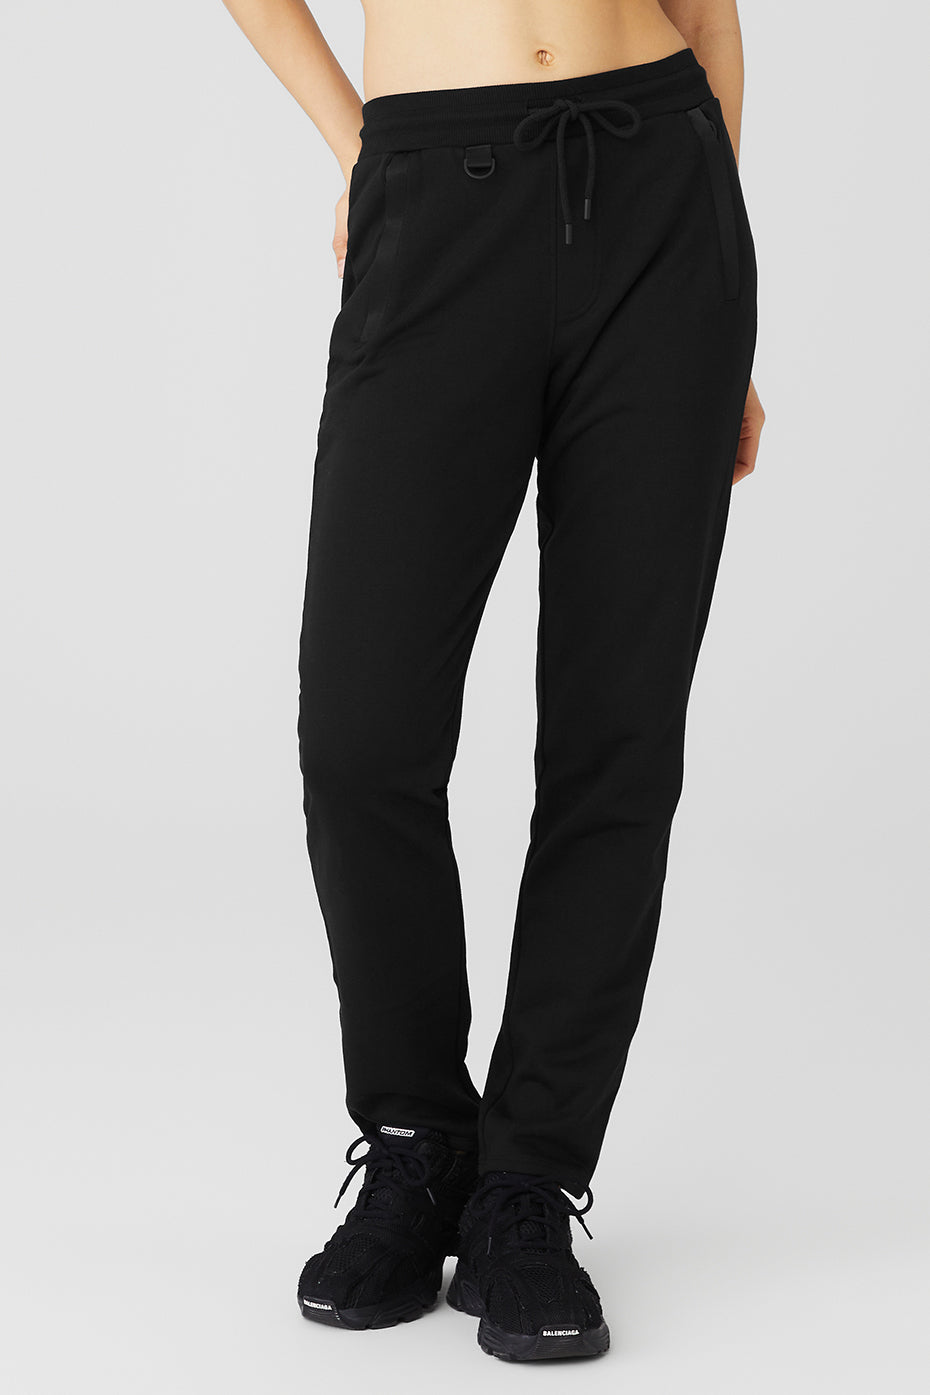 NWT SOLD OUT - ALO WOMEN'S FIERCE DISTRESSED JOGGER SWEATPANTS - BLACK -  SMALL 